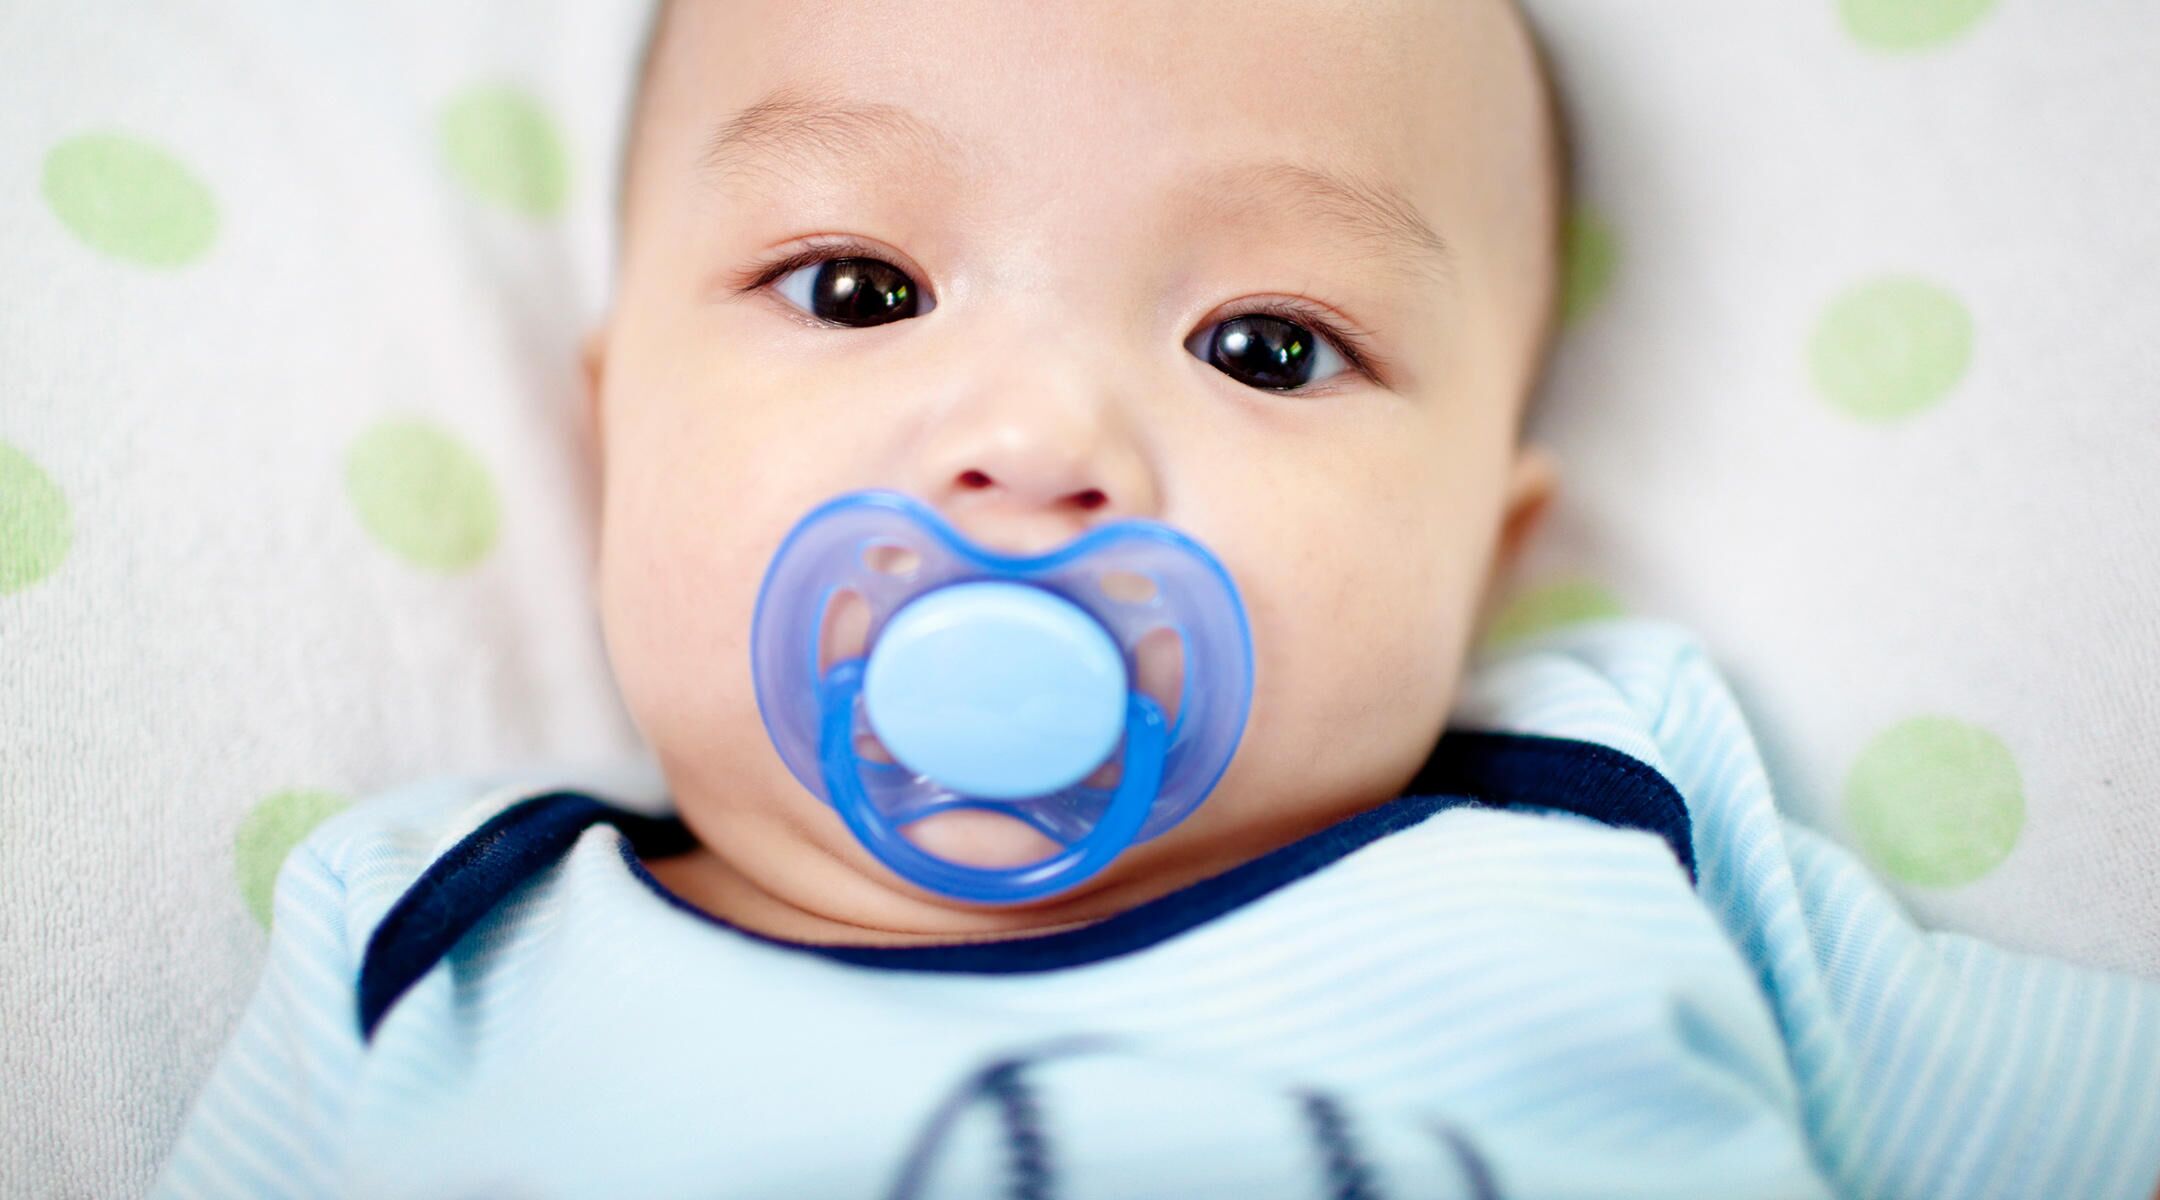 When Do Babies' Eyes Change Color?